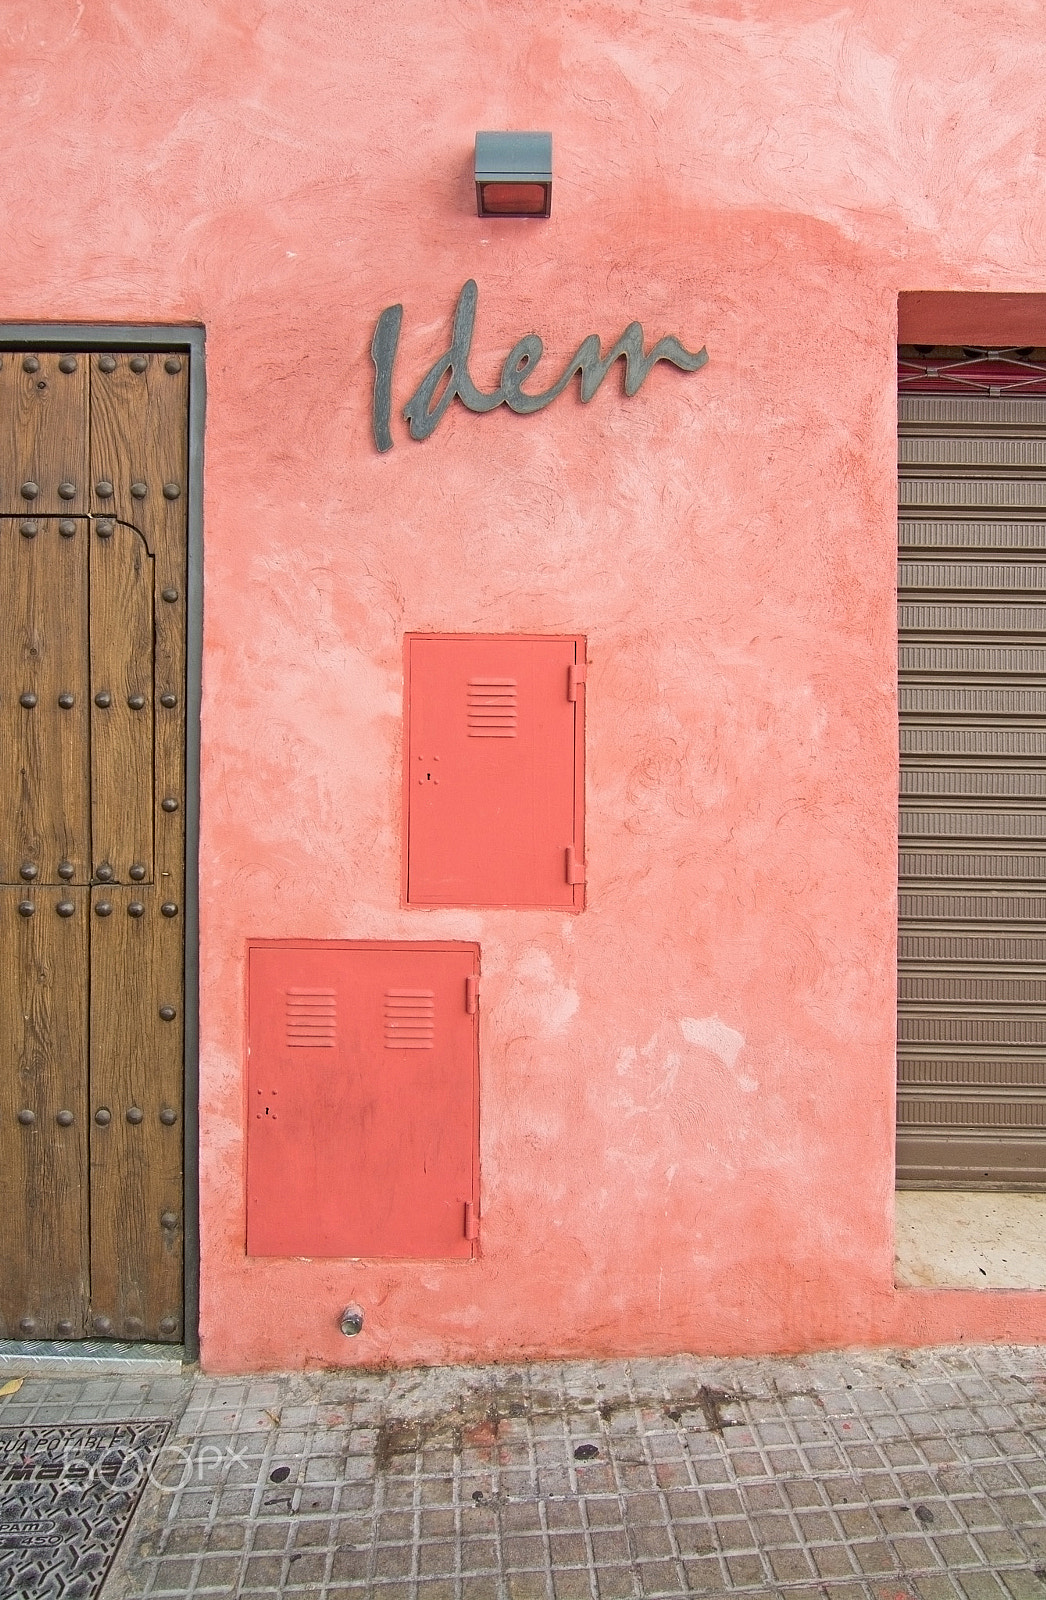 Nikon D7100 sample photo. Idem sign on red roughcast wall photography